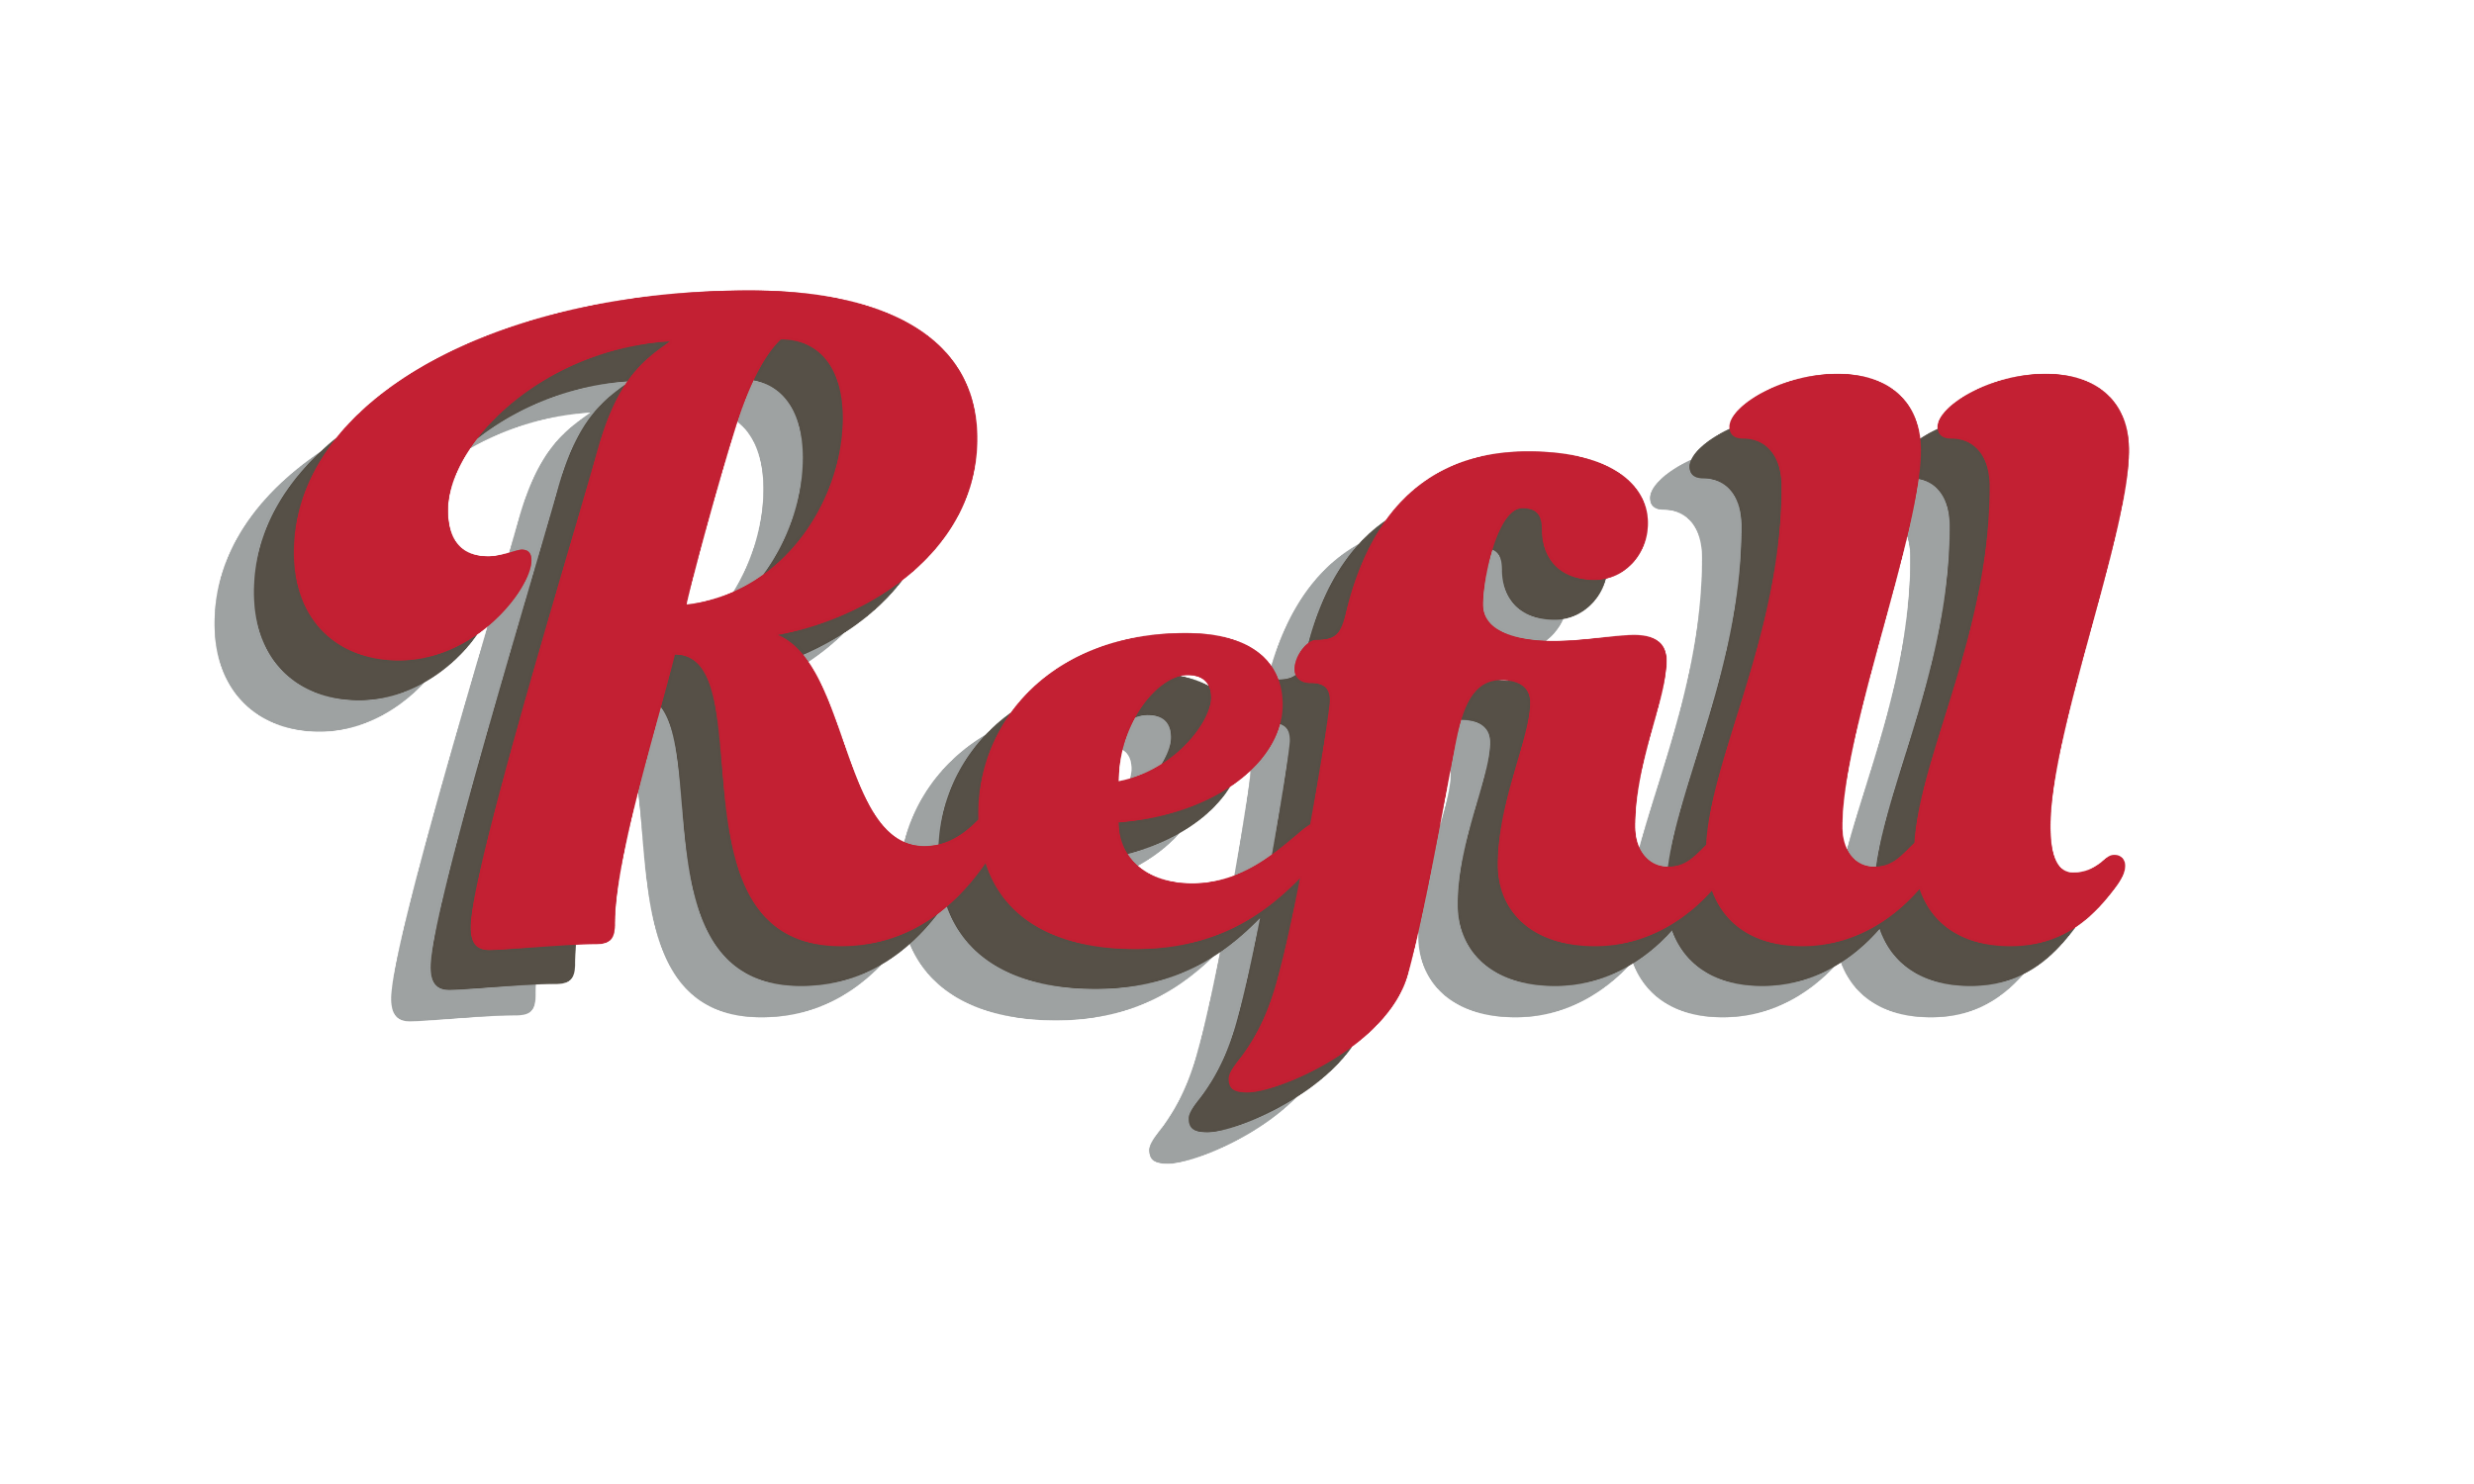 Refill Offers Recurring Auto Giving Platform for Young Alumni